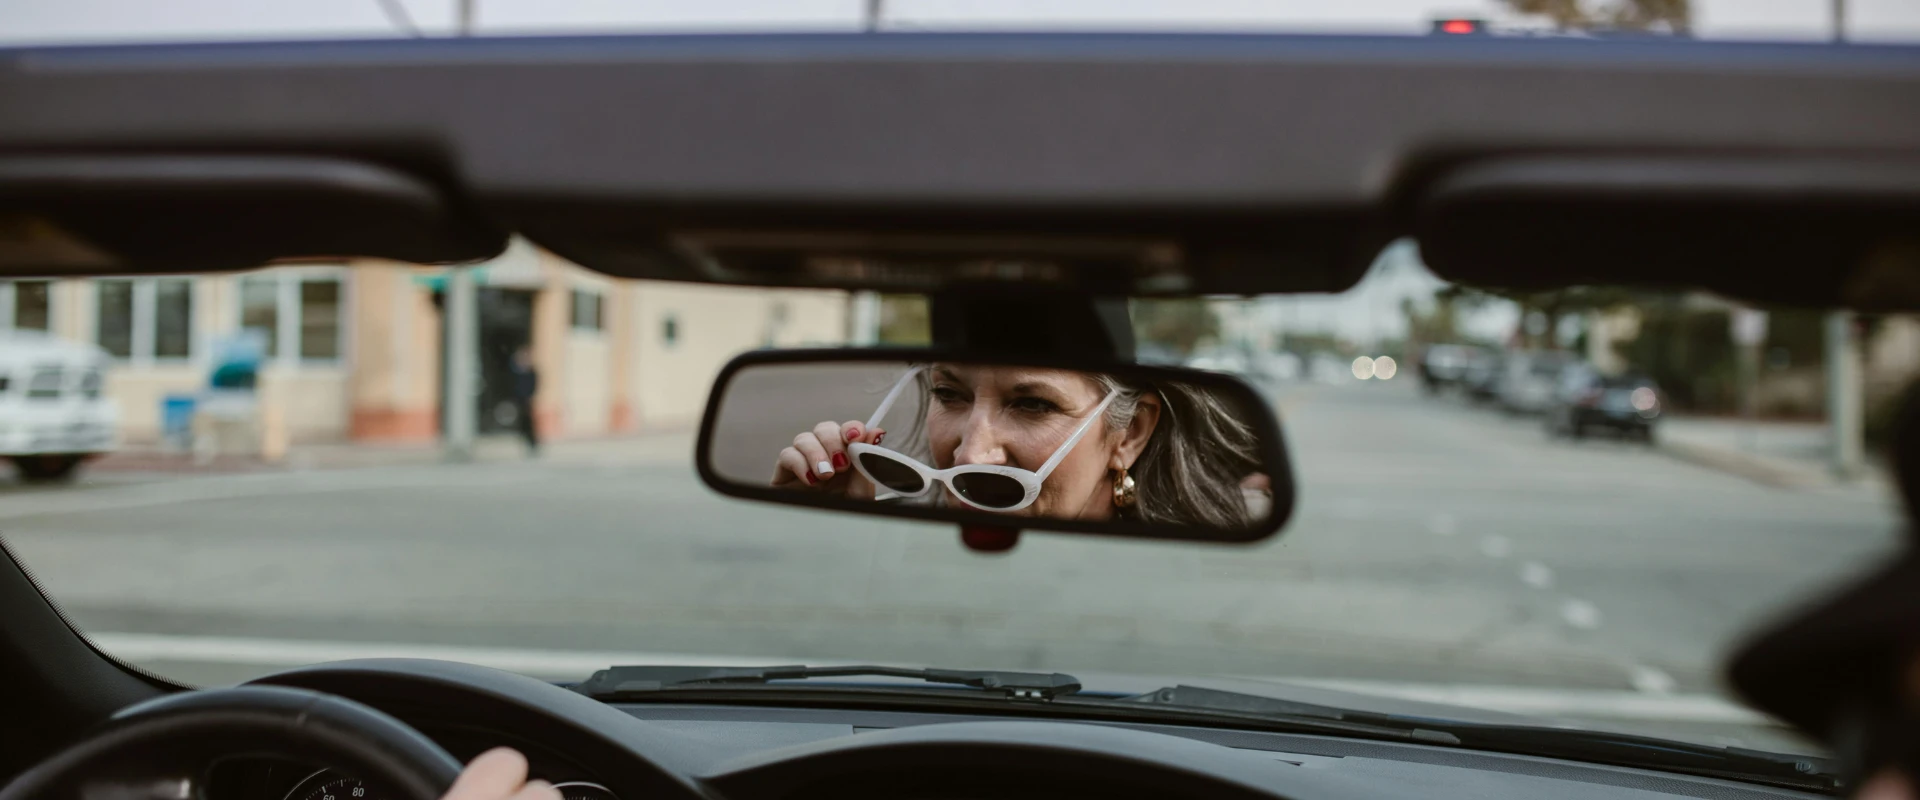 A photo of a woman in a car holding a pair of sunglasses.